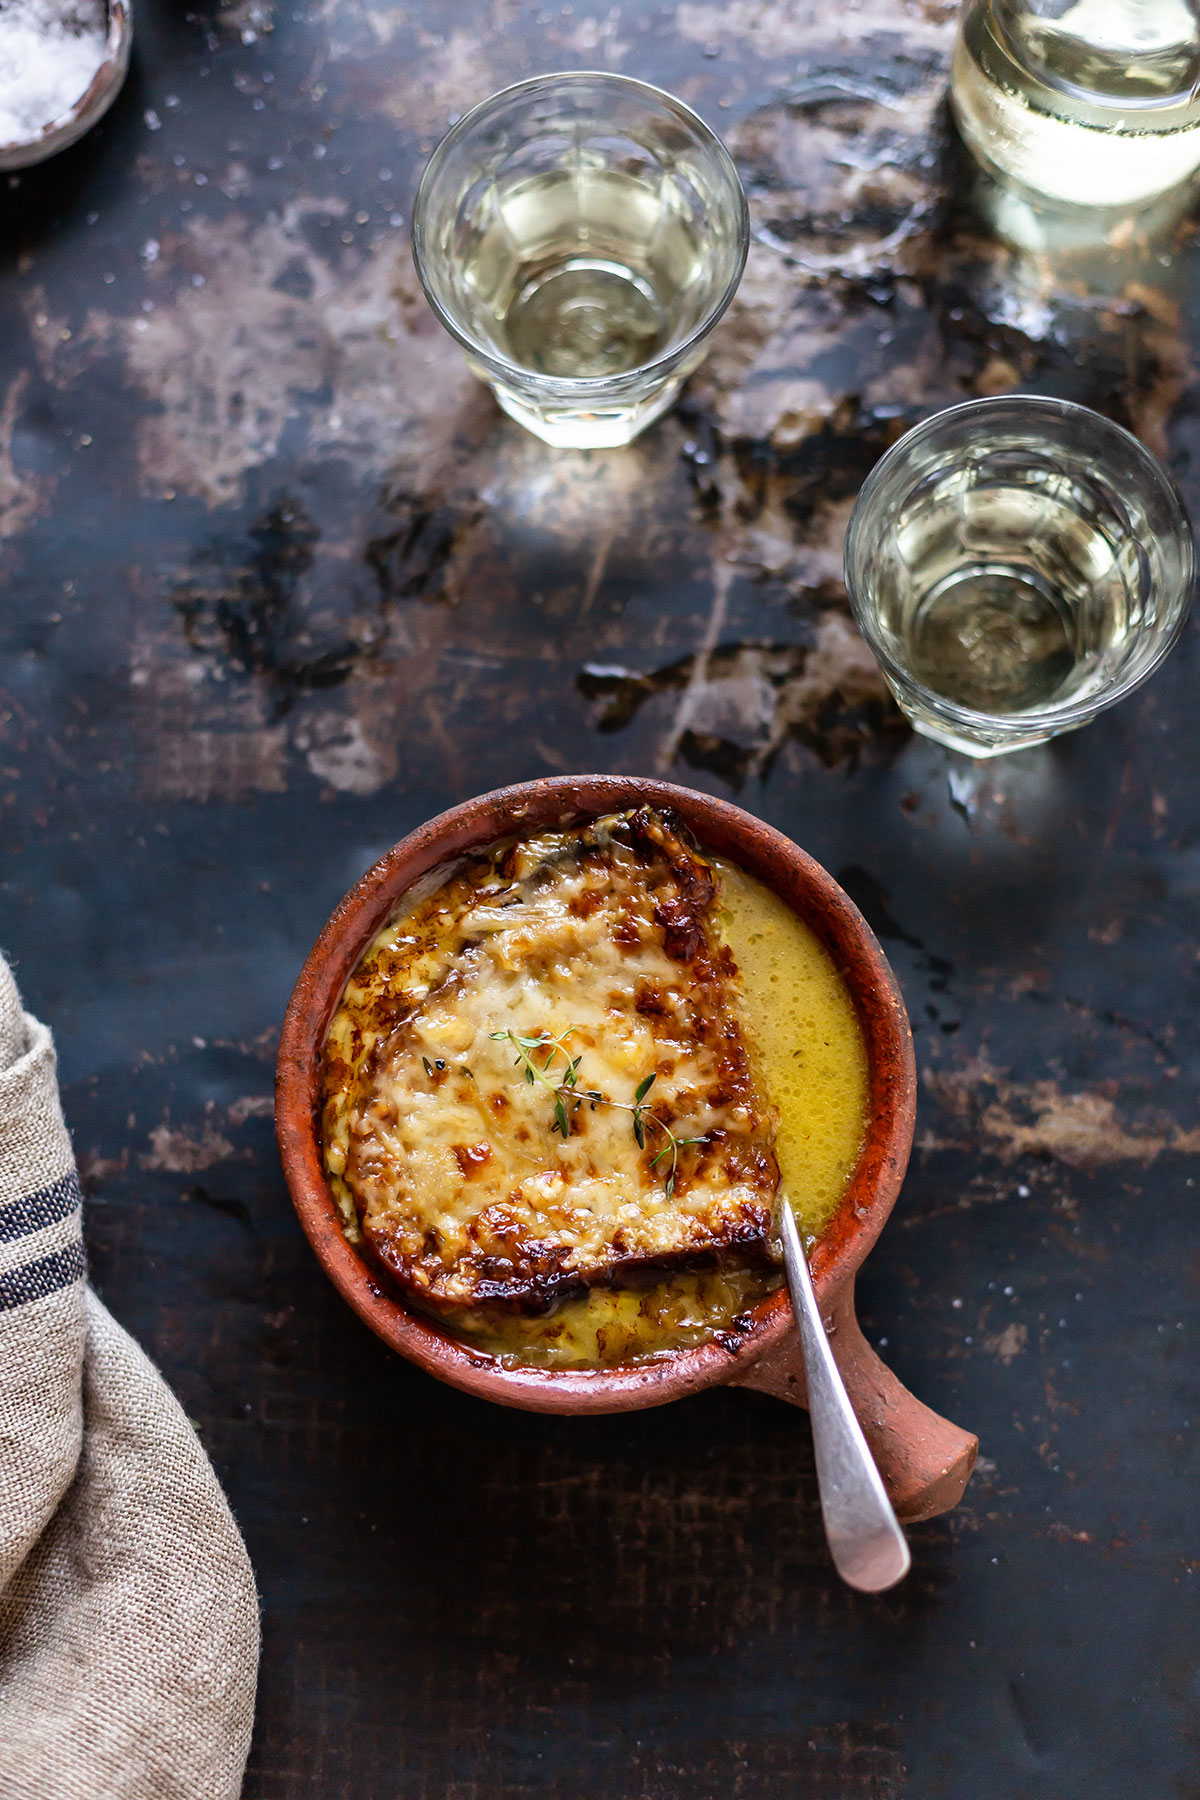 A very delicious French onion soup recipe